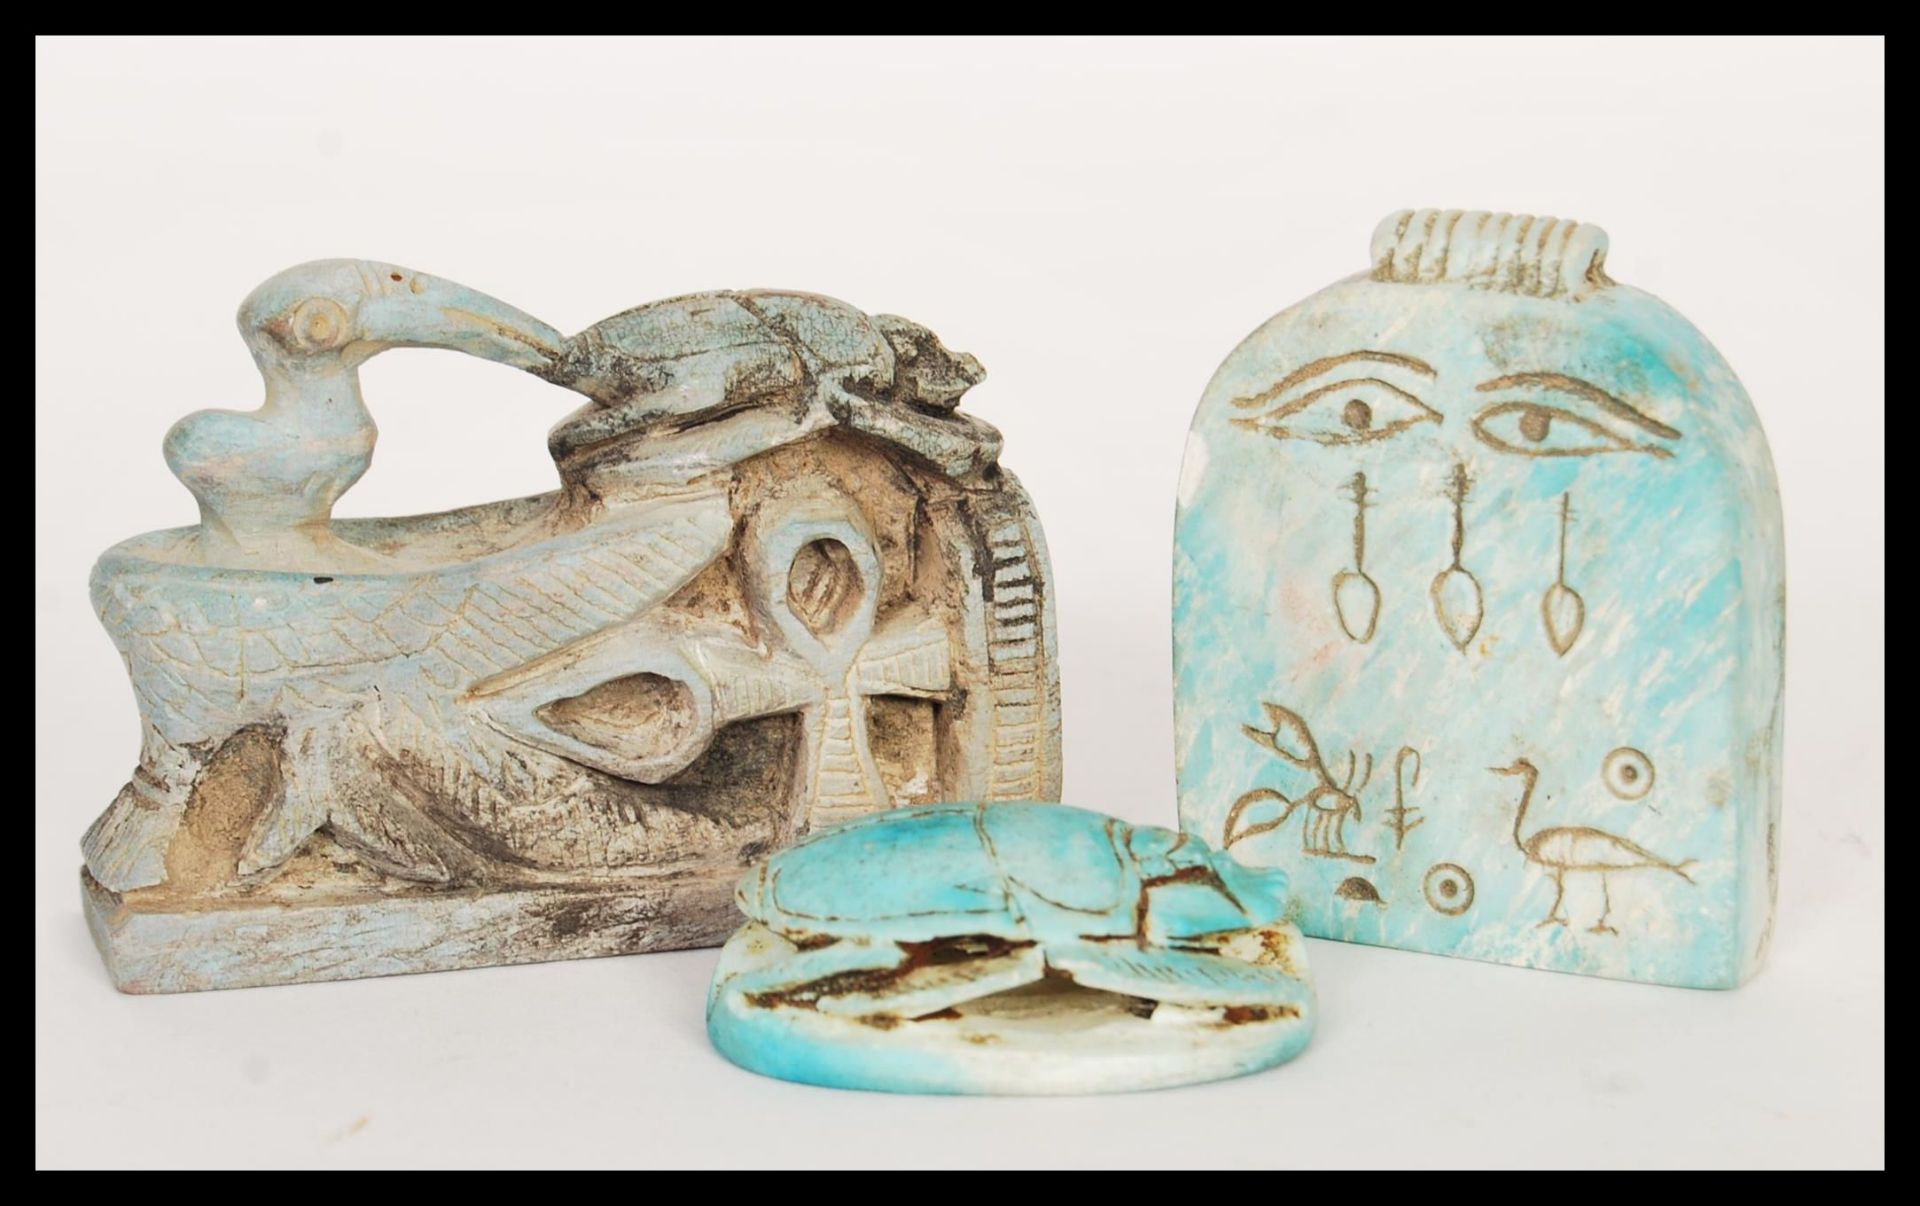 A group of 20th Century Egyptian revival amulets to include a ceramic scarab bead with hieroglyphics